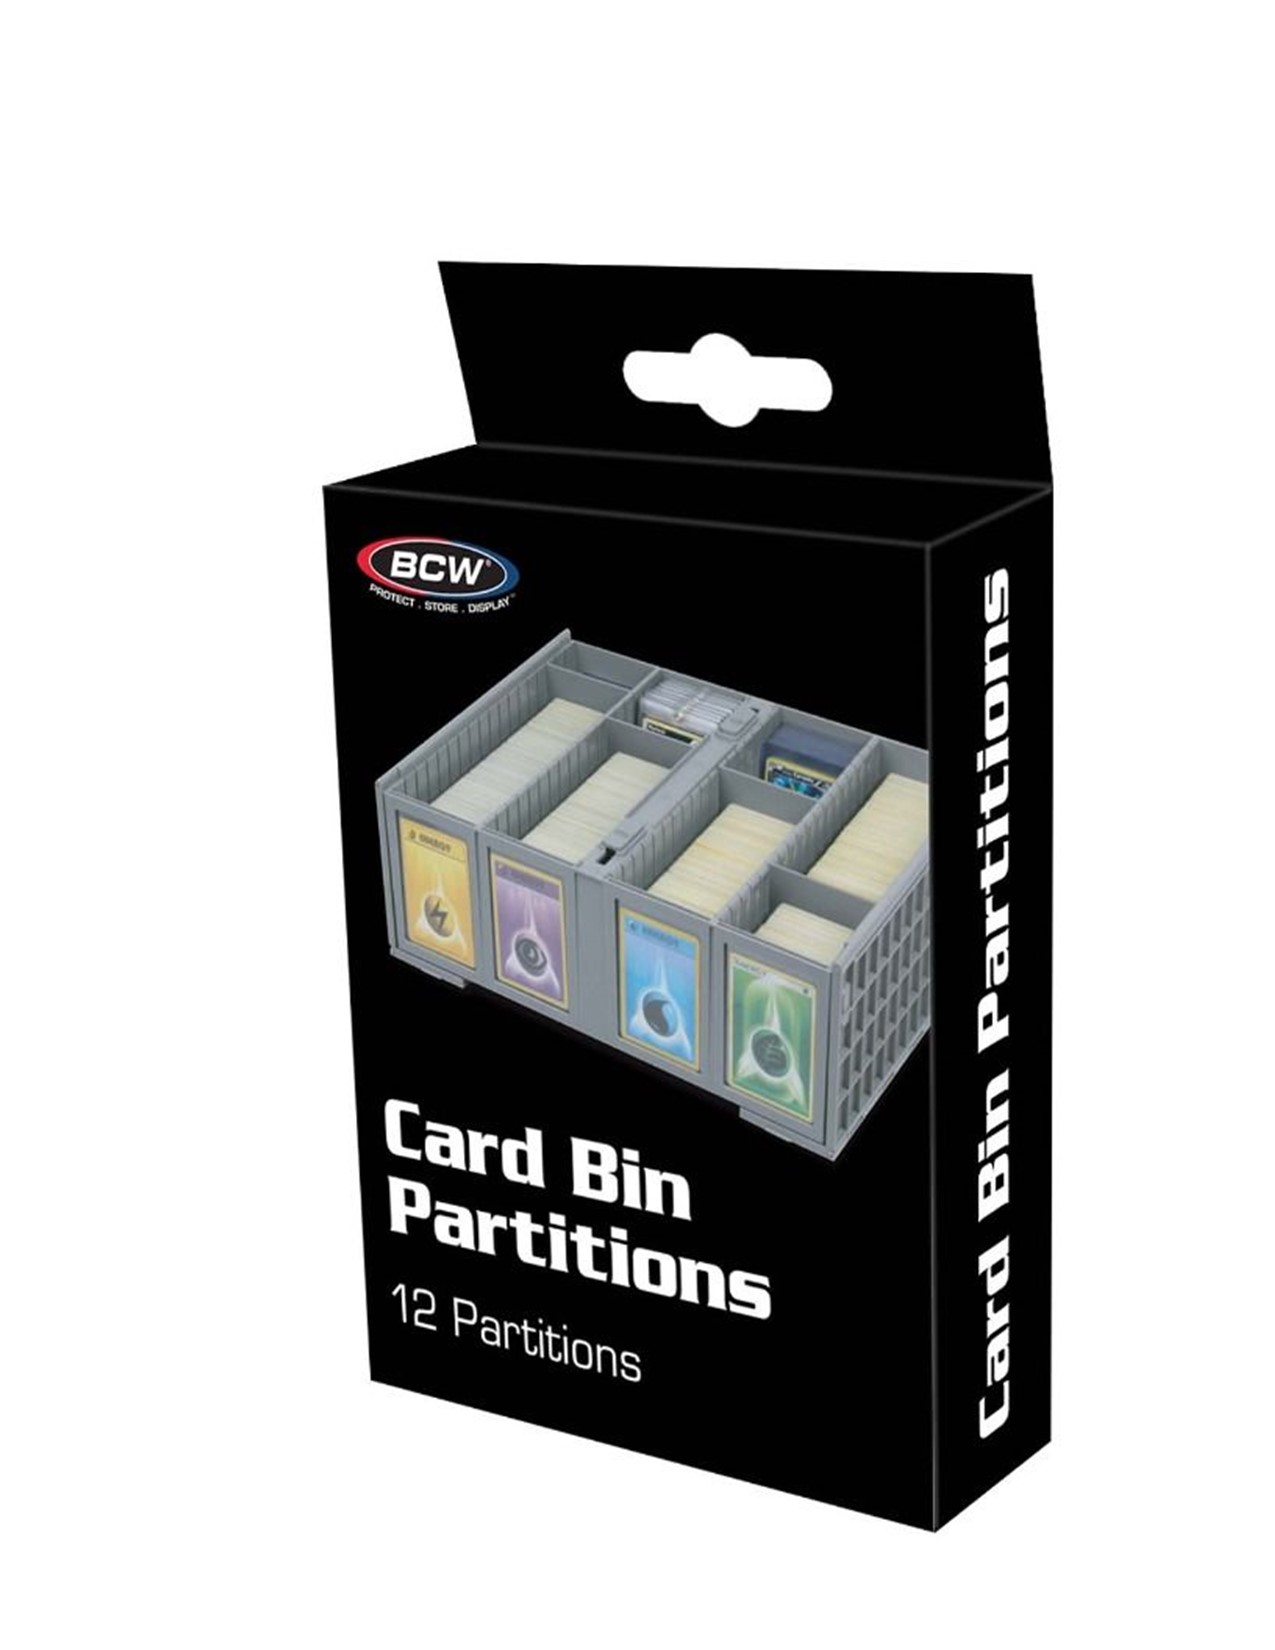 Collectible Card Bin Partitions - Grey (12)